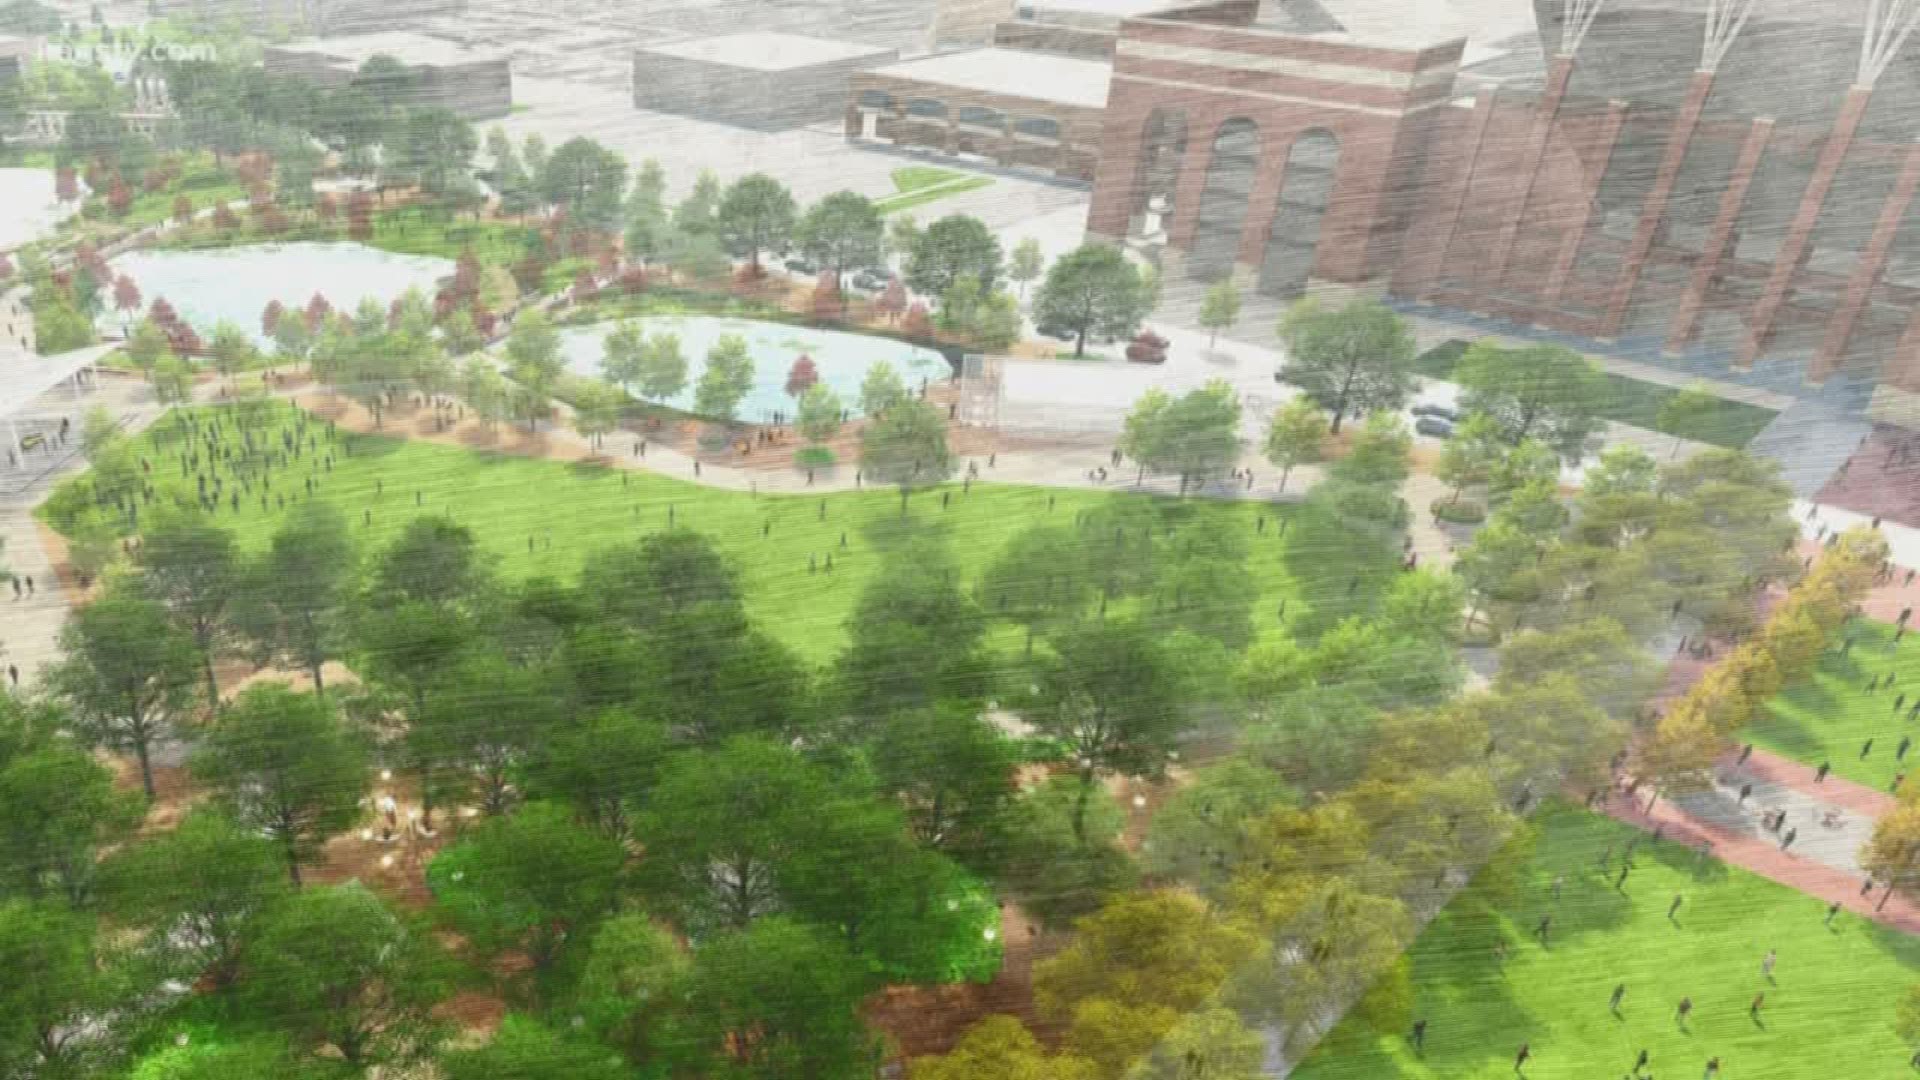 Aggie Park will be 20-acres of green space that is expected for students to use for studying, relaxing and hosting events.